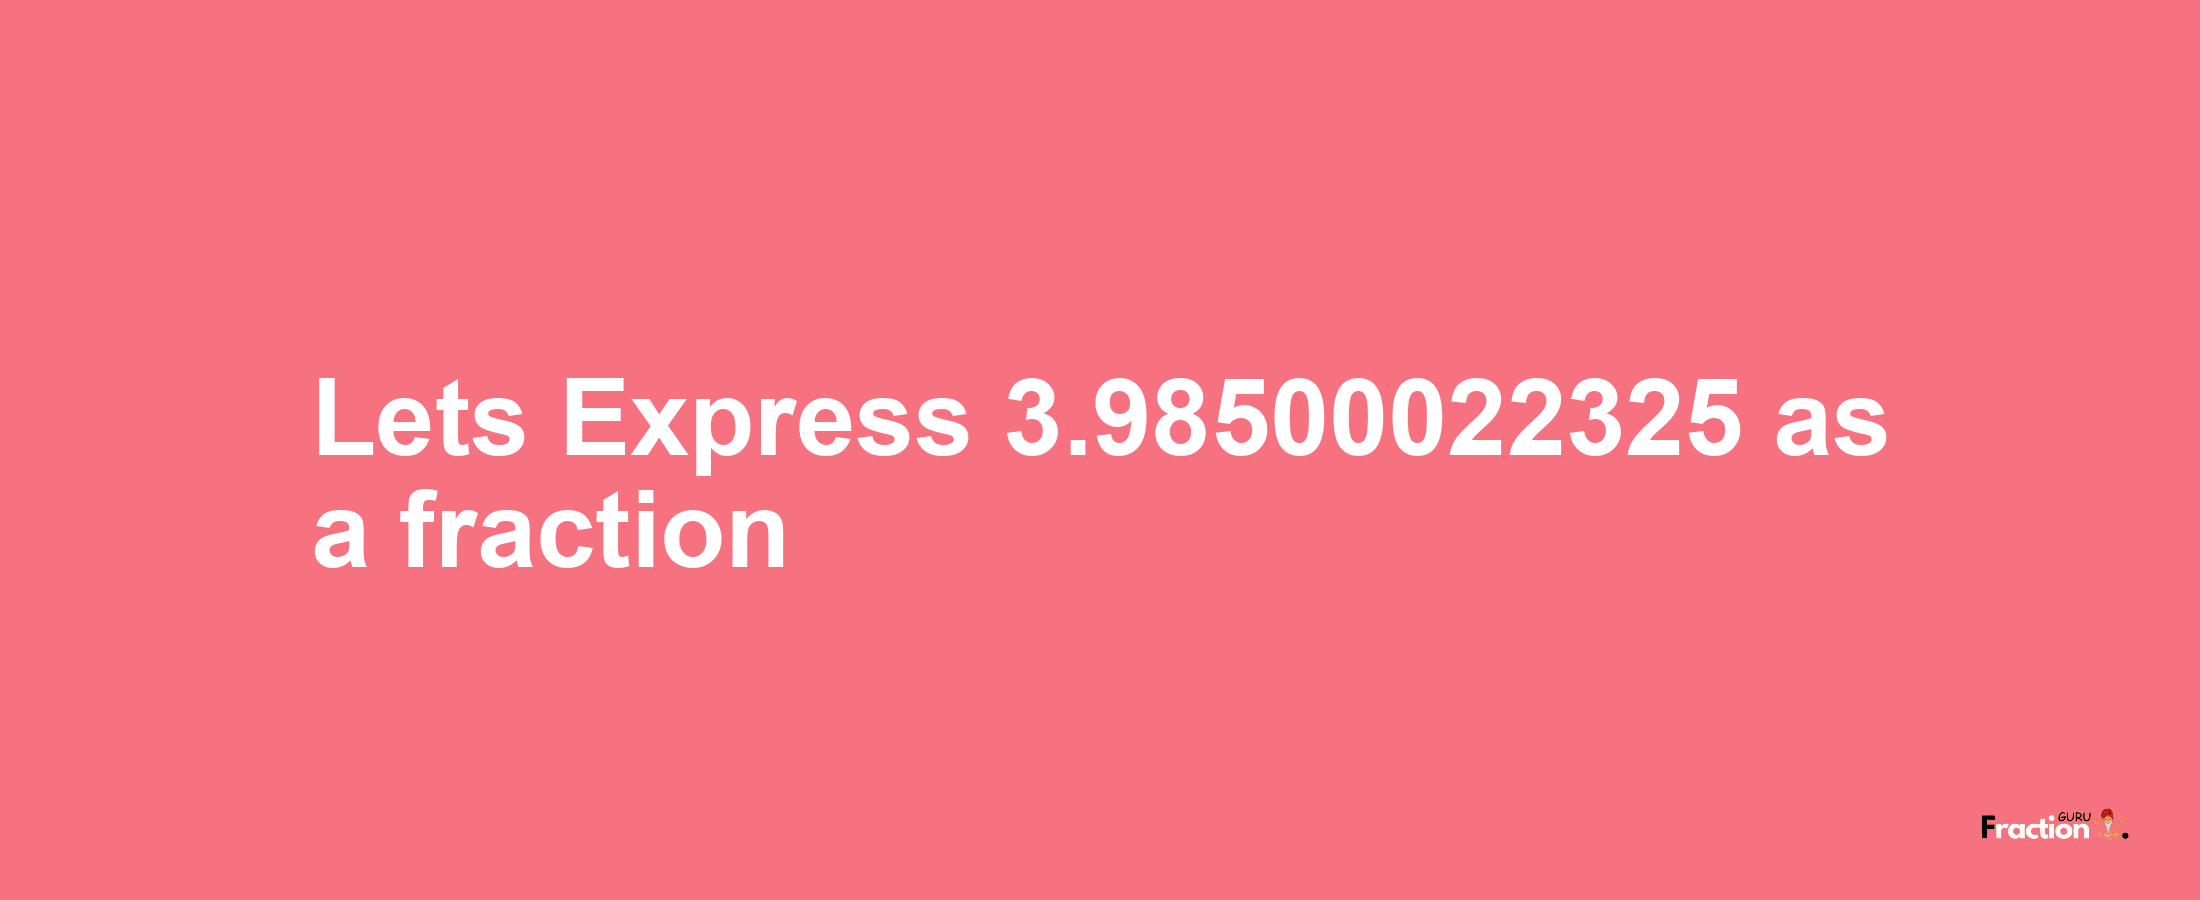 Lets Express 3.98500022325 as afraction